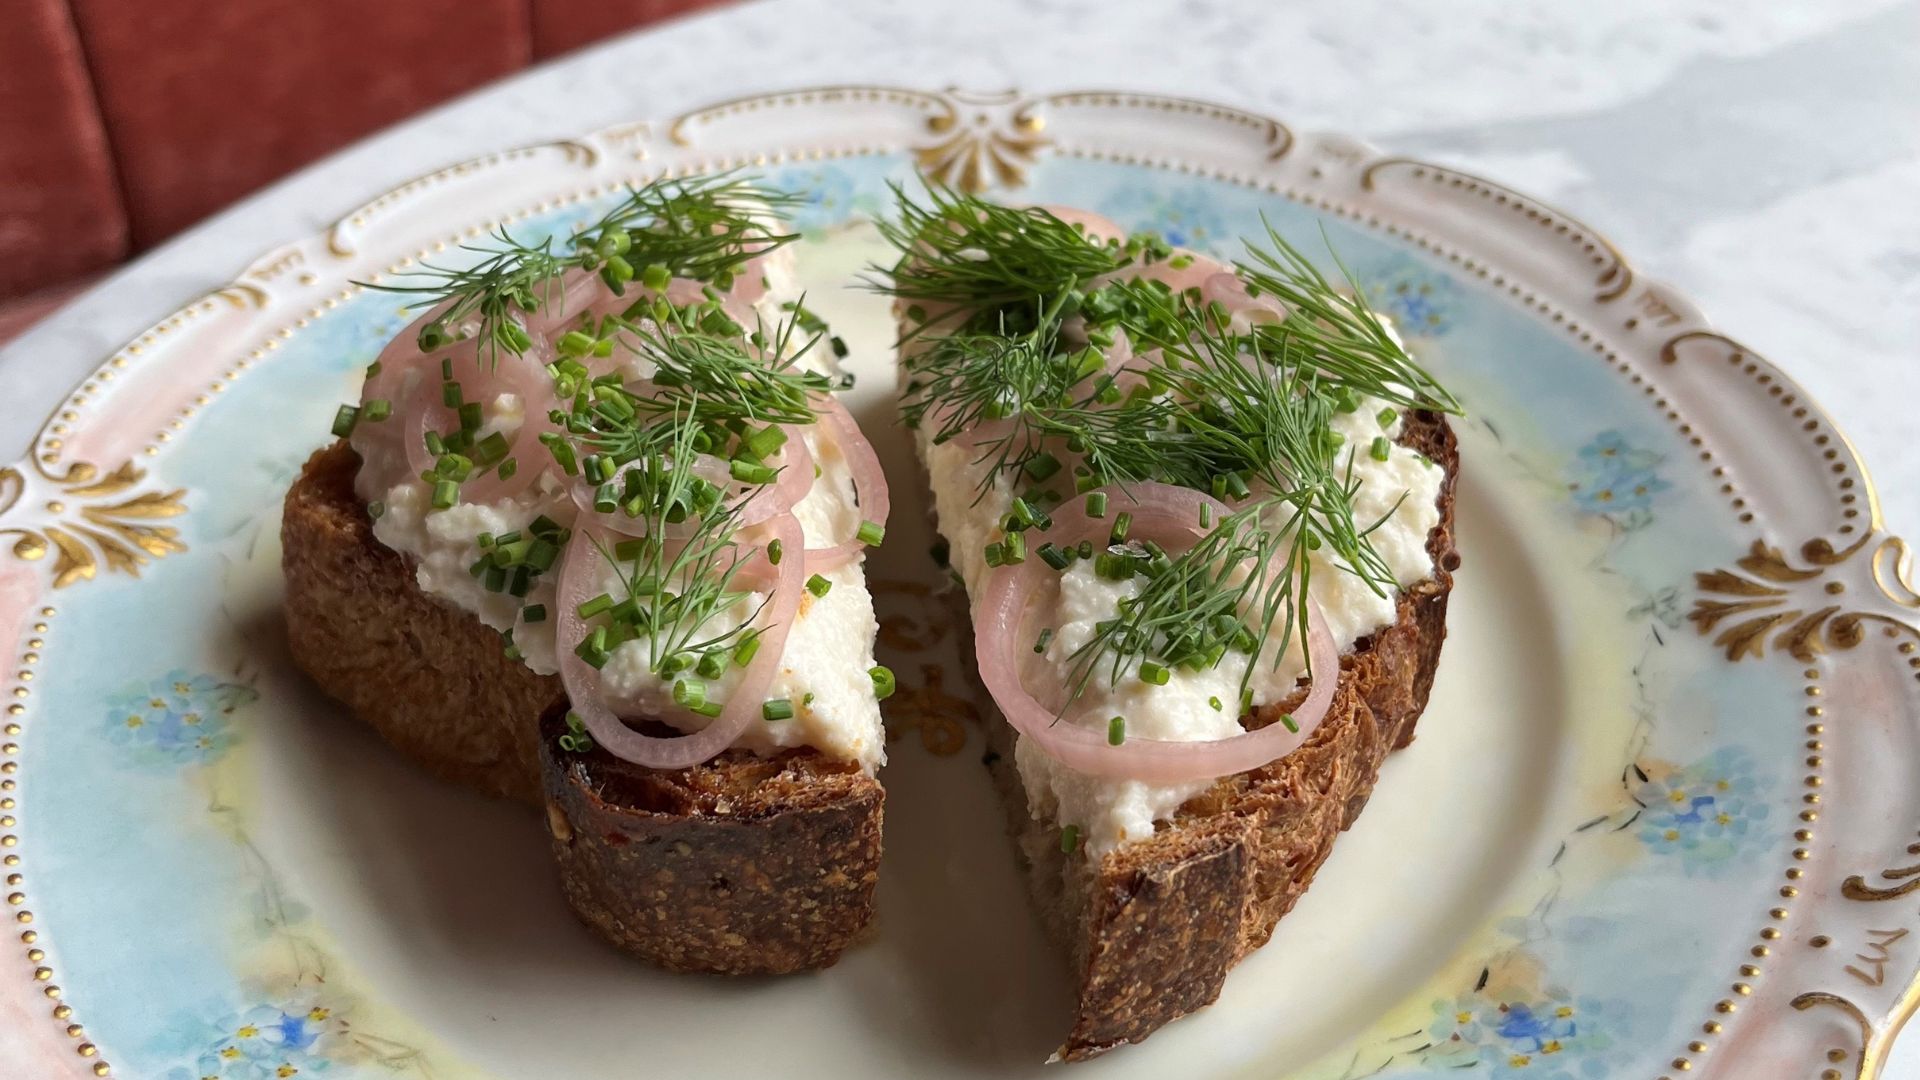 Smoked trout rillette toast with whipped trout mousse served on toasted sourdough porridge bread from Winslow’s Table and topped with pickled shallots, dill and chives.